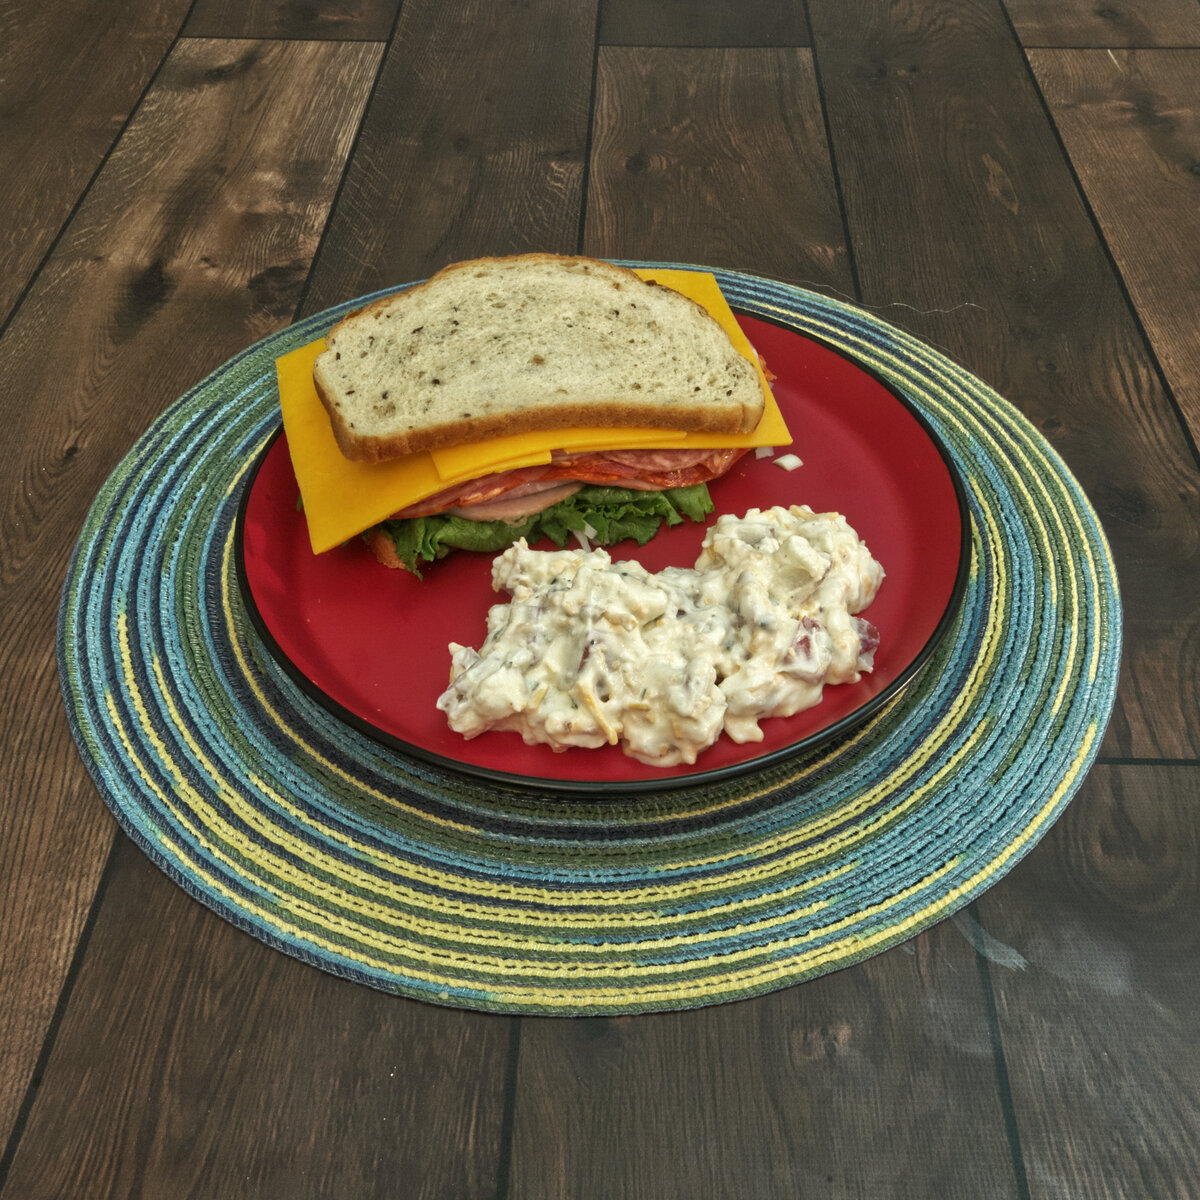 Cold Cuts Sandwich on Dill Rye Bread with Potato Salad